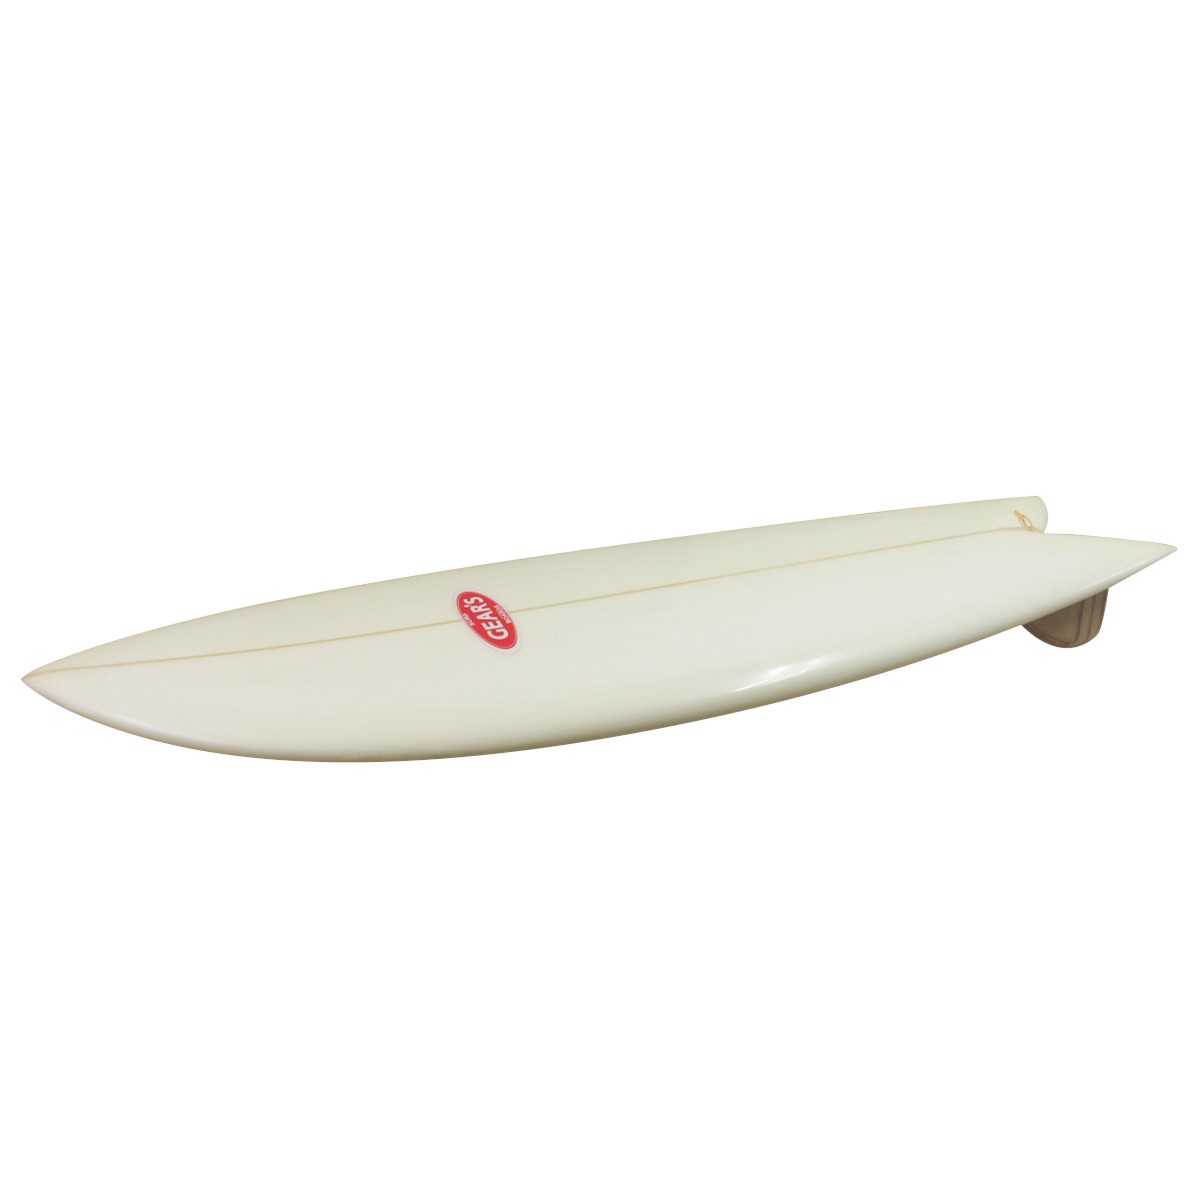 GEAR`S SURFBOARDS / PRITTY FISH 5`8